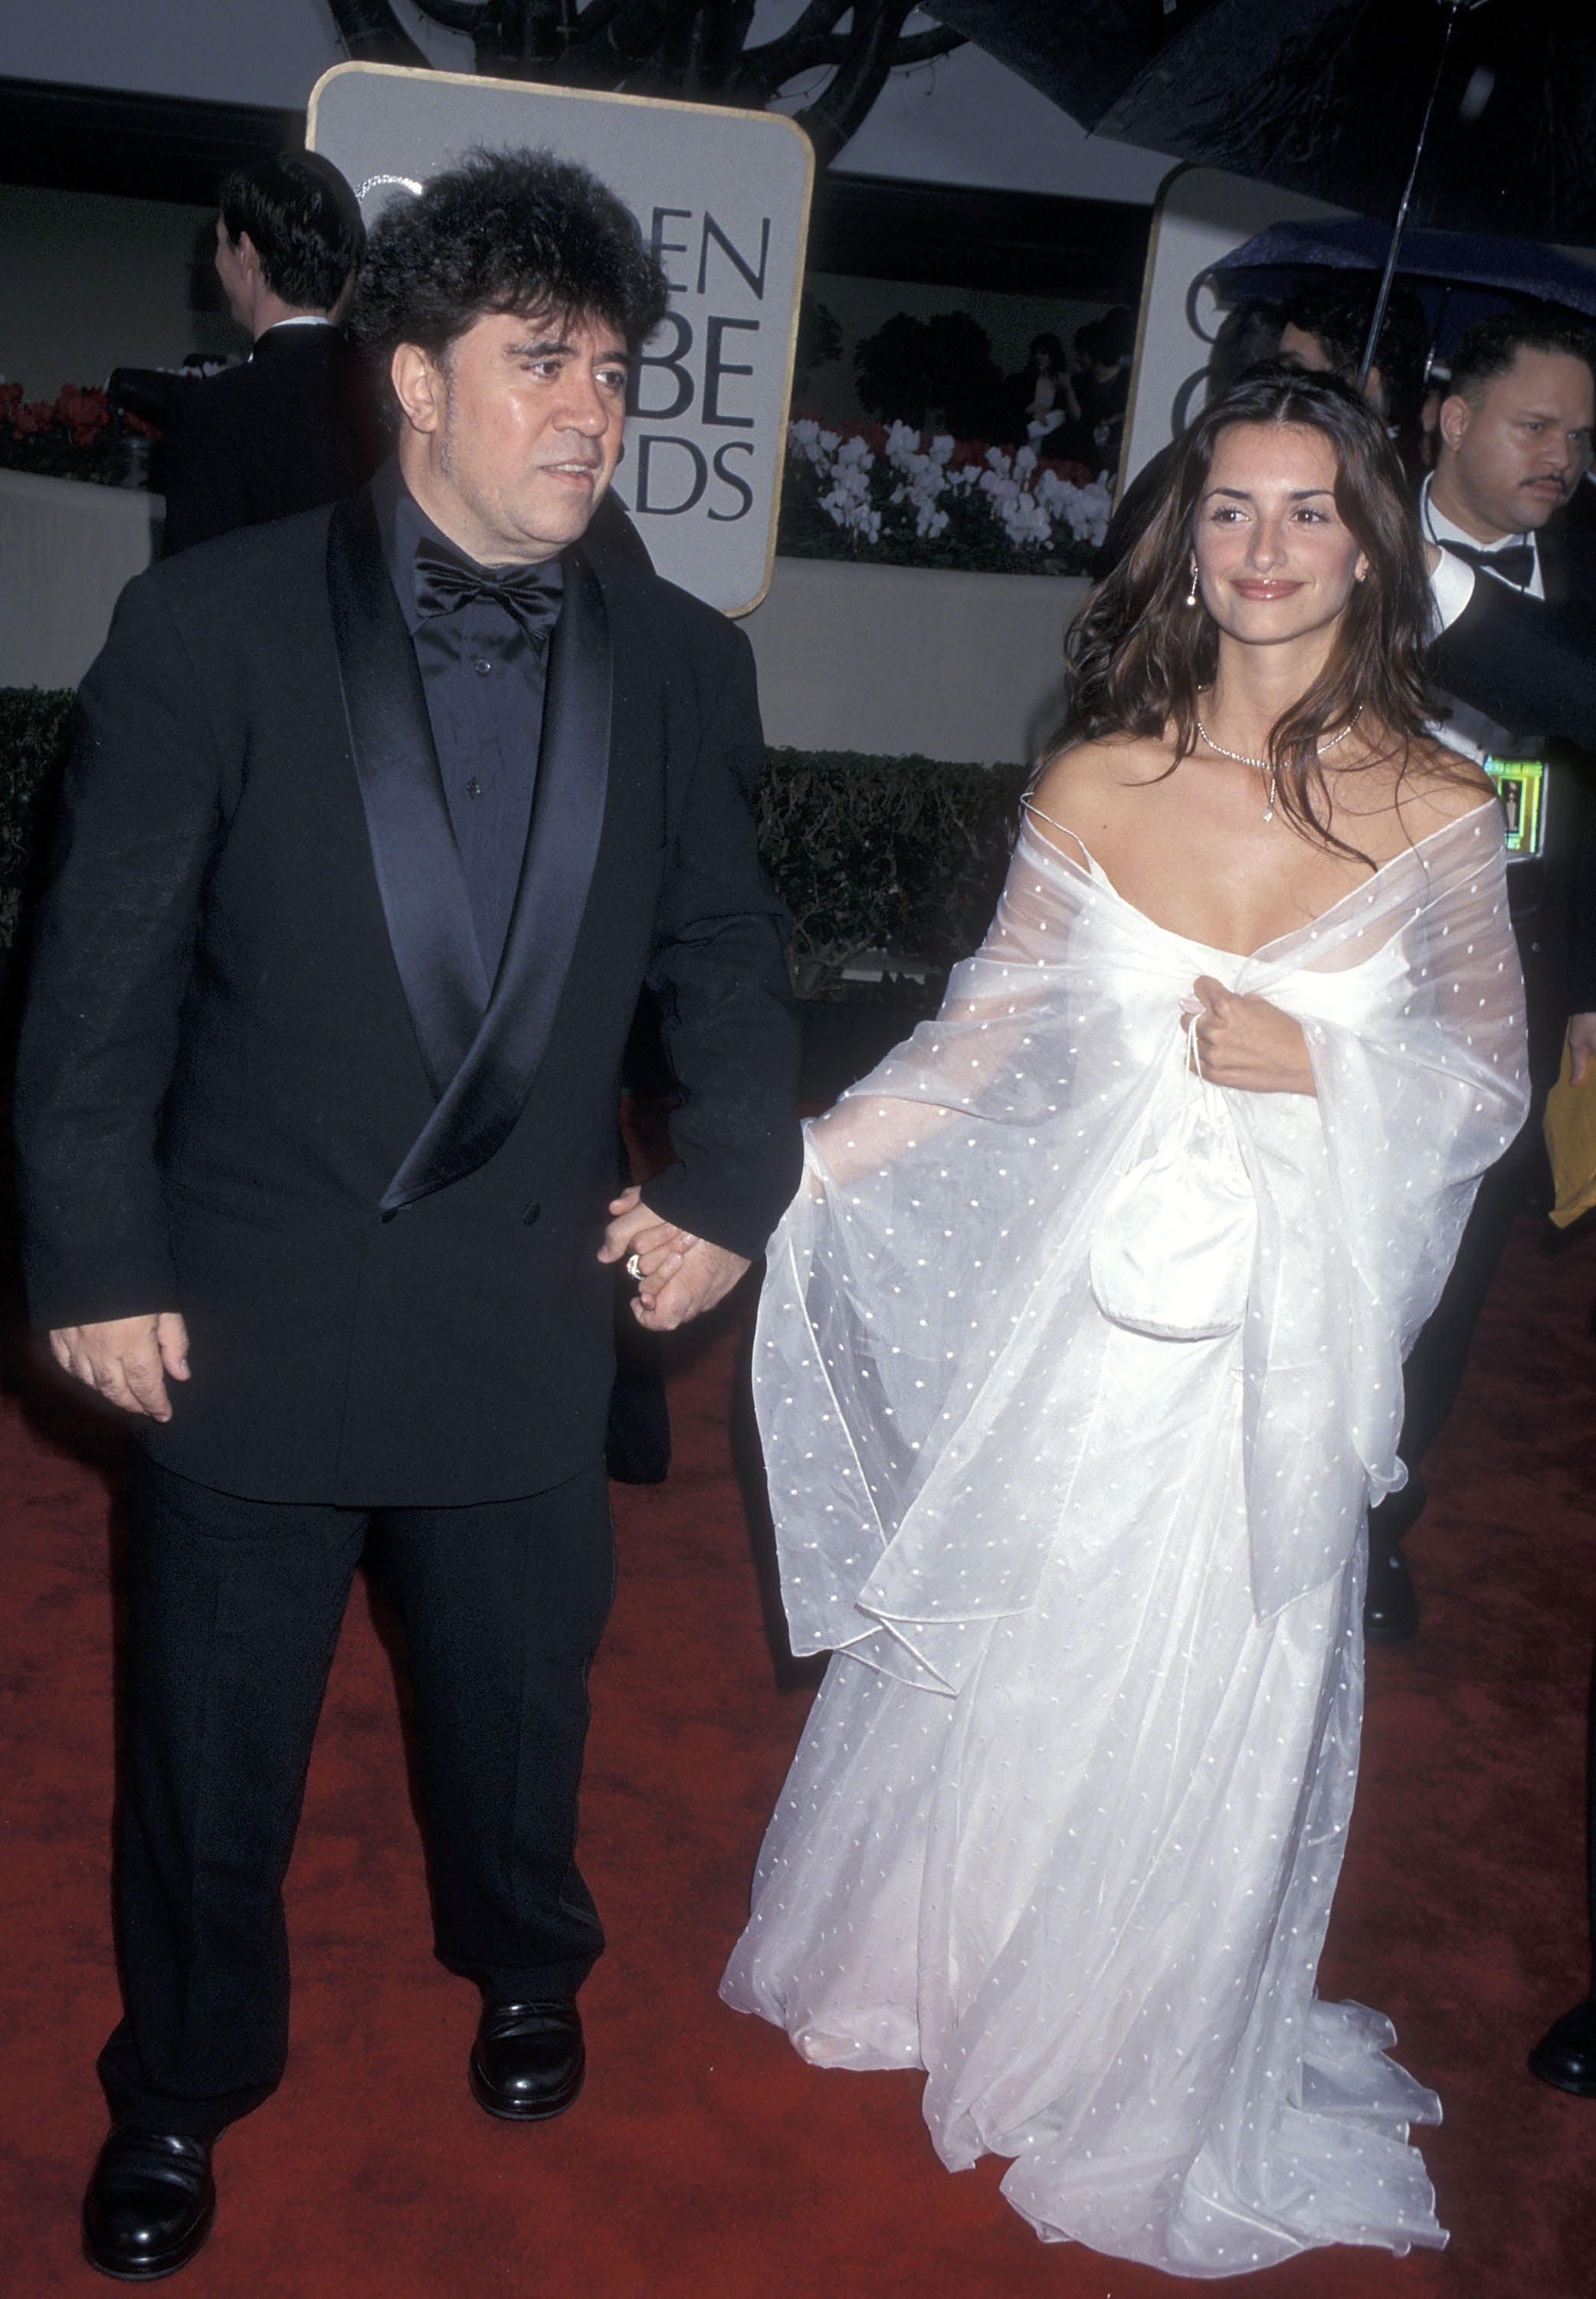 penelope cruz holding hands with pedro almodovar on the golden globes red carpet 2000